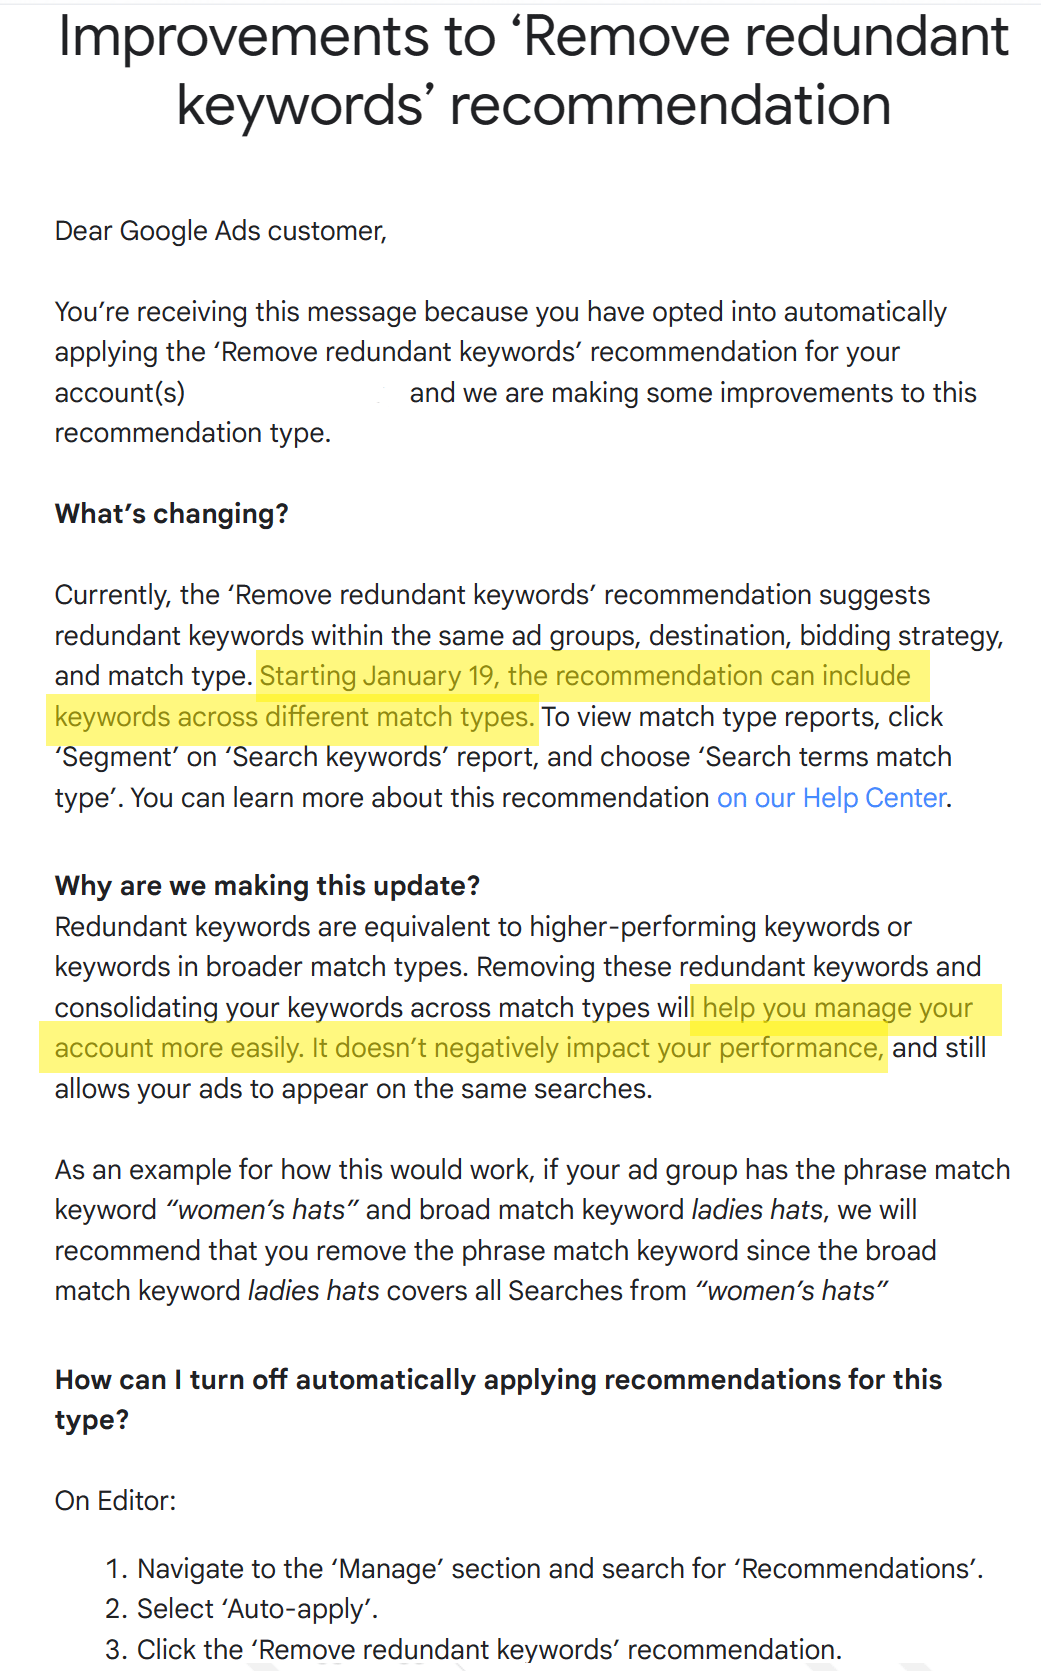 Google's change to the redundant keywords policy will take effect on January 19, 2023.